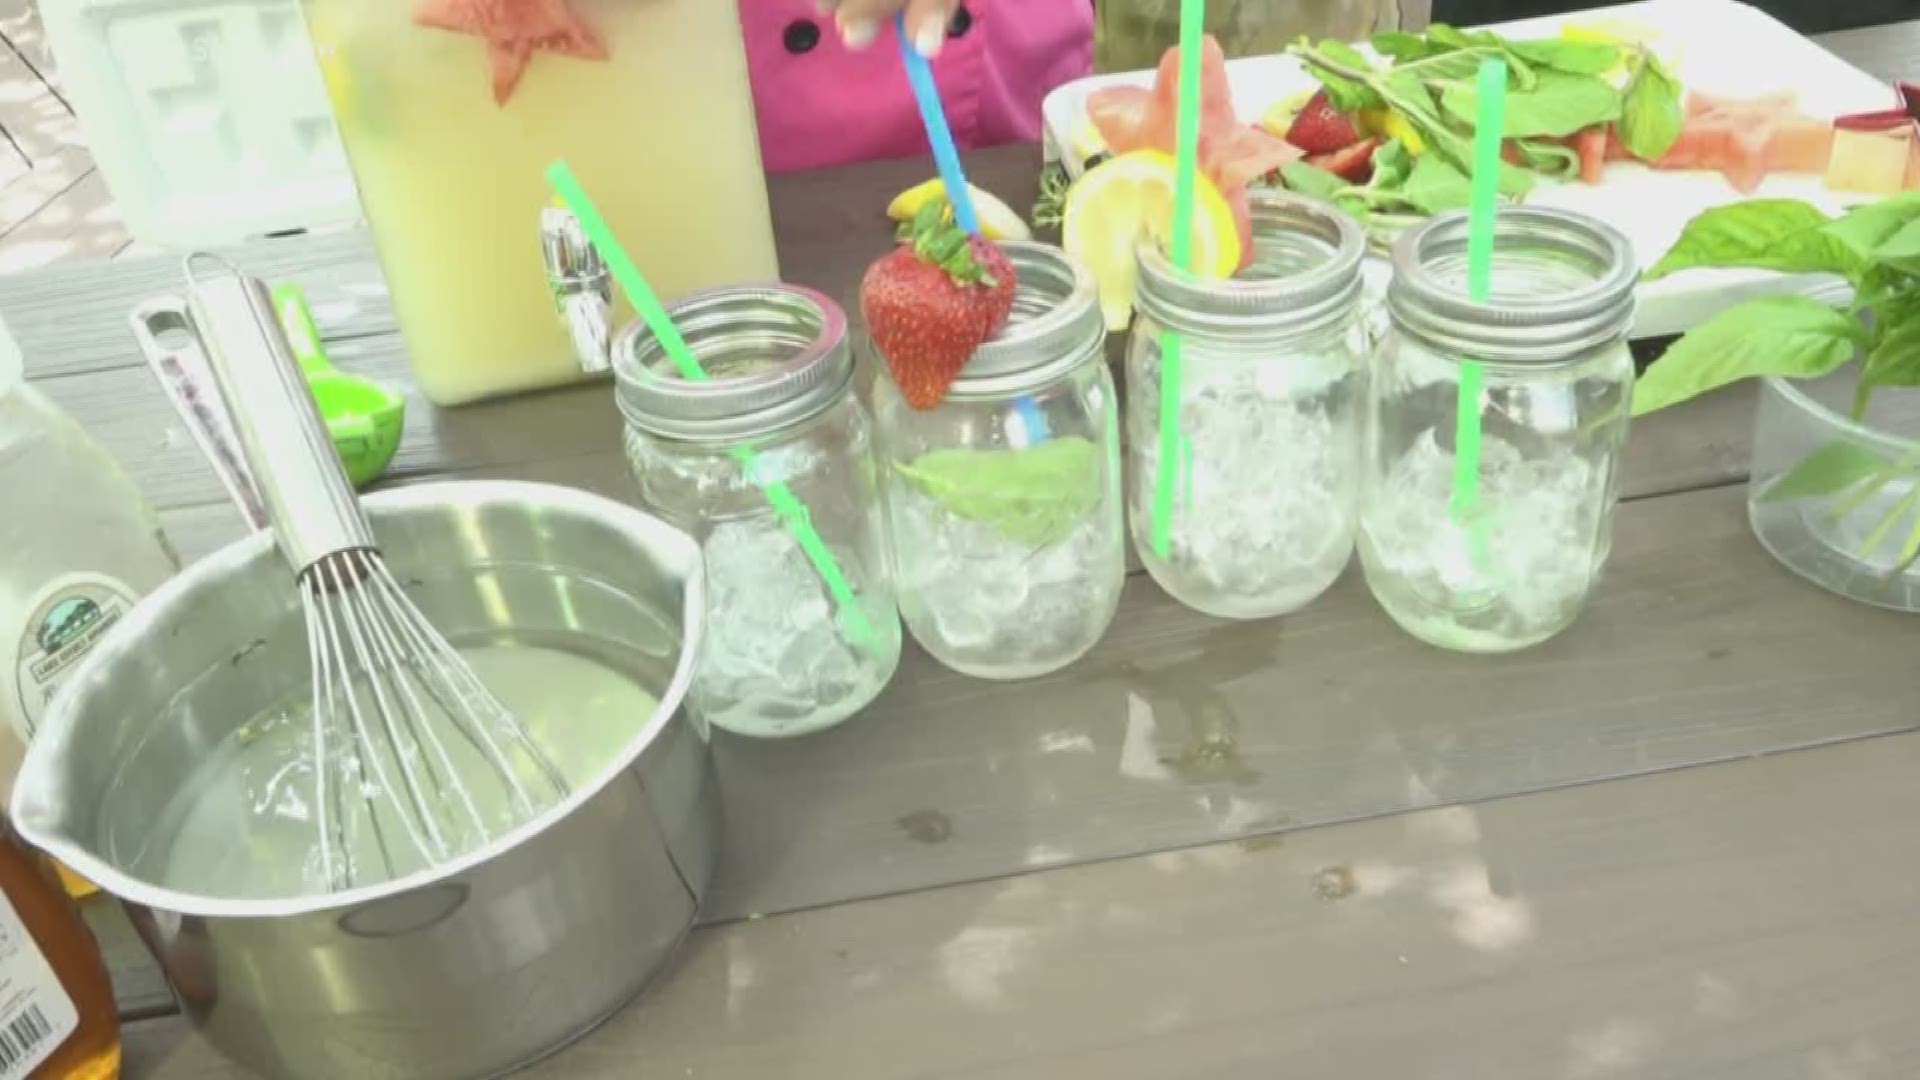 Chef Char joins 13 ON YOUR SIDE to help you stay refreshed this summer with some fruit and herb garnished lemonades!